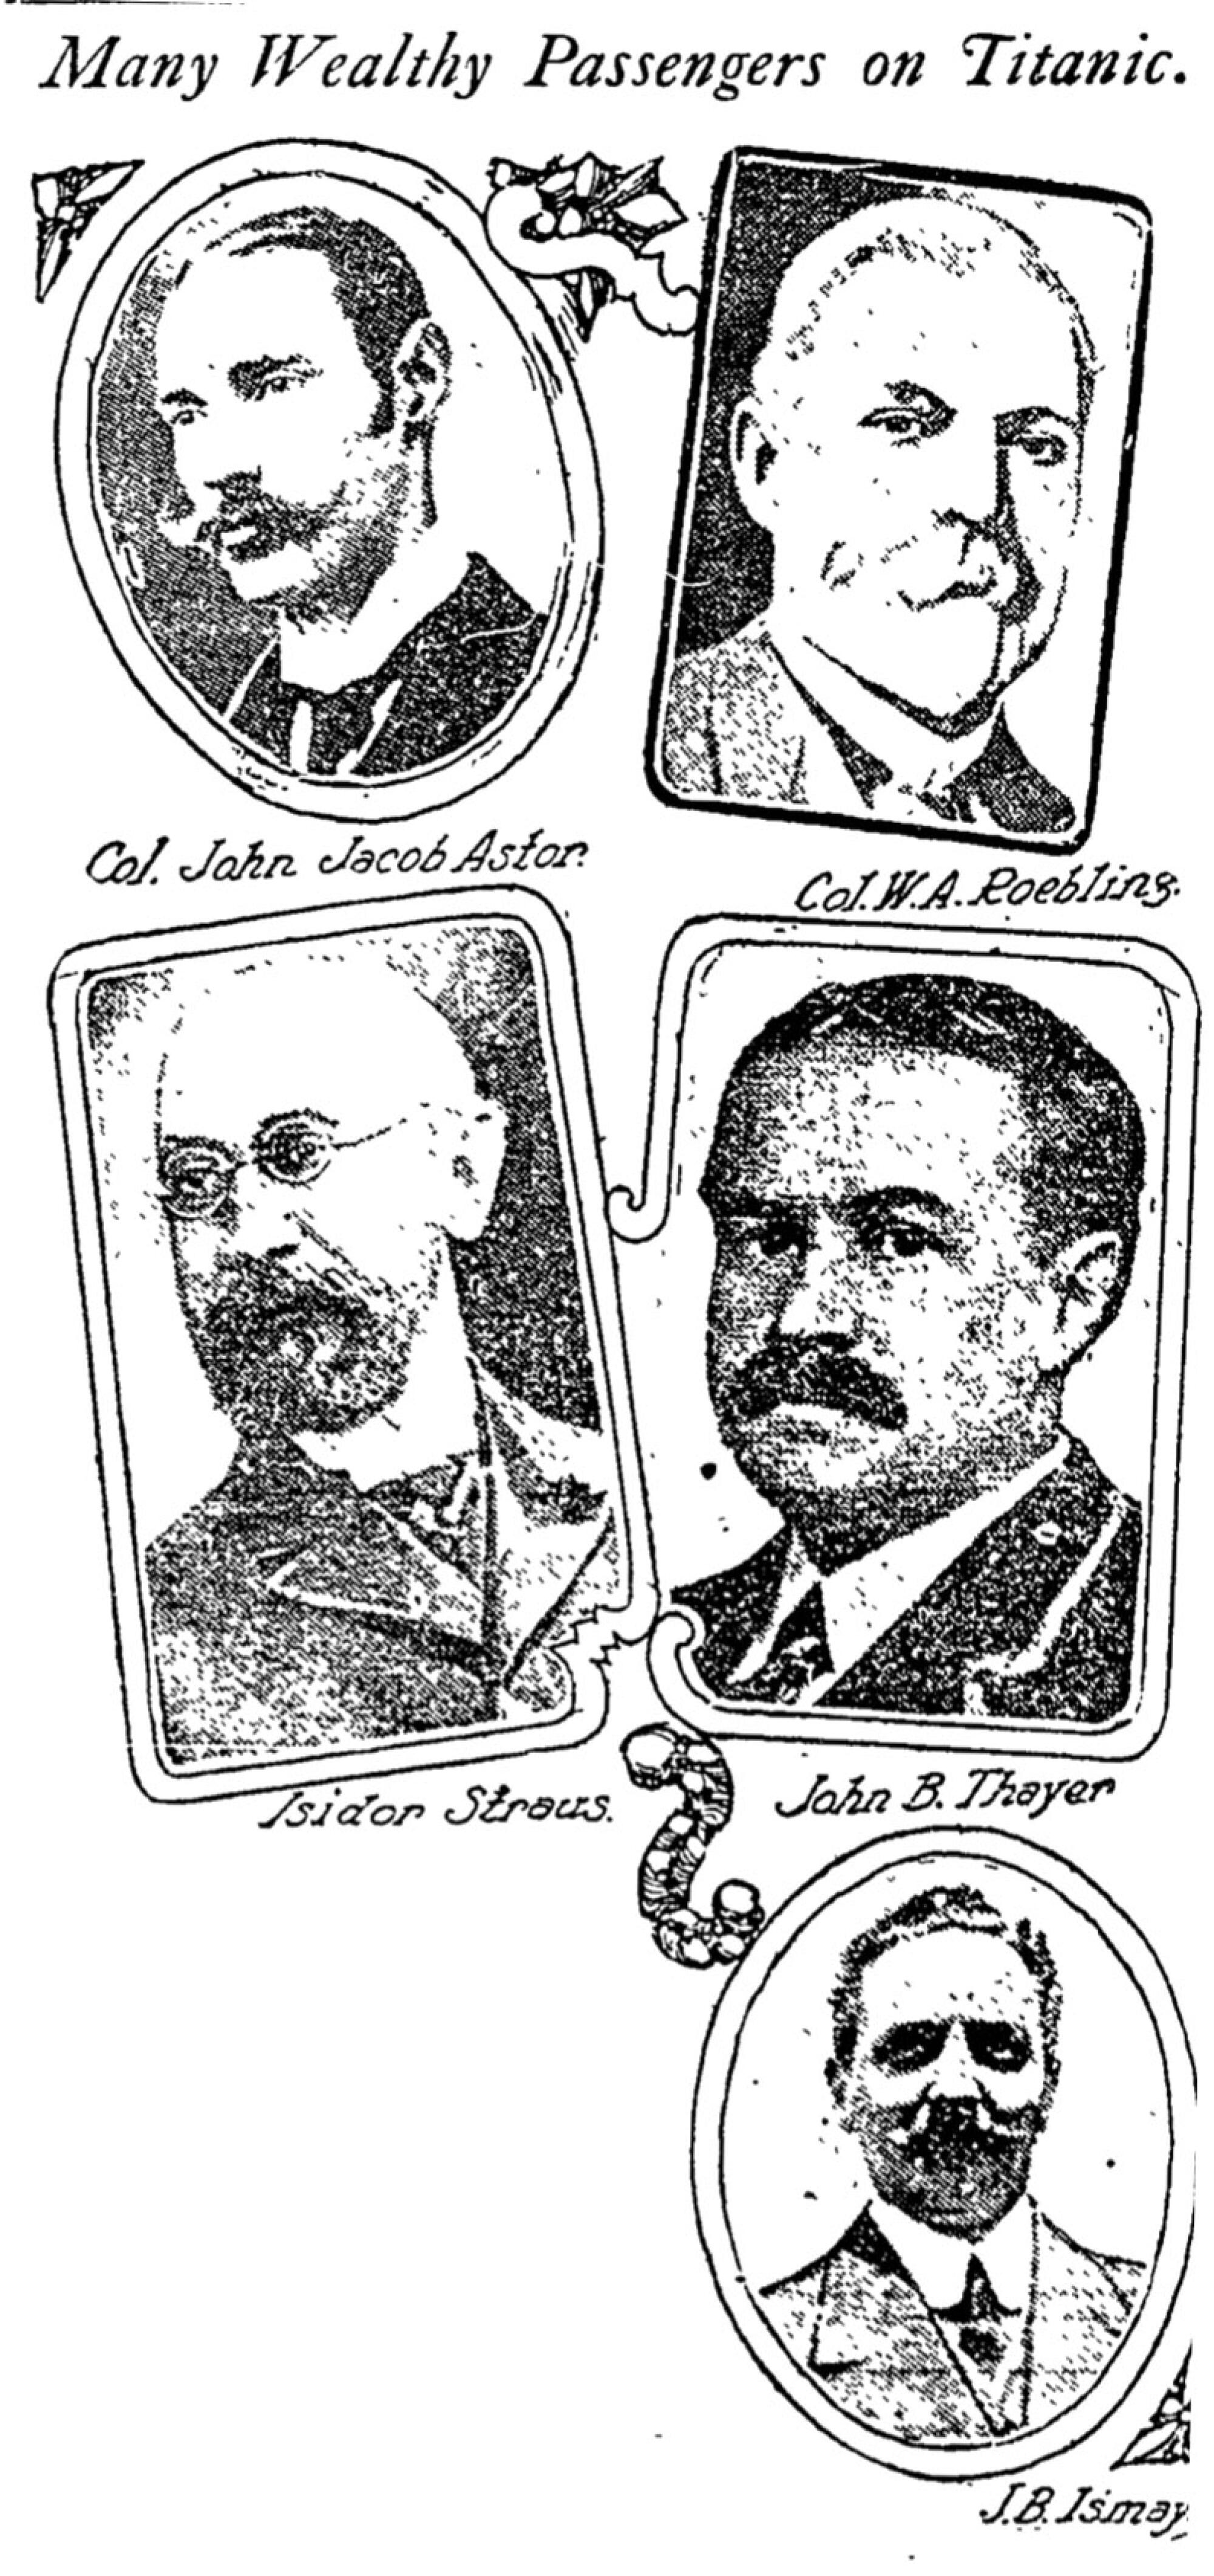 Line drawings of some of the more prominent people that were aboard the RMS Titanic 